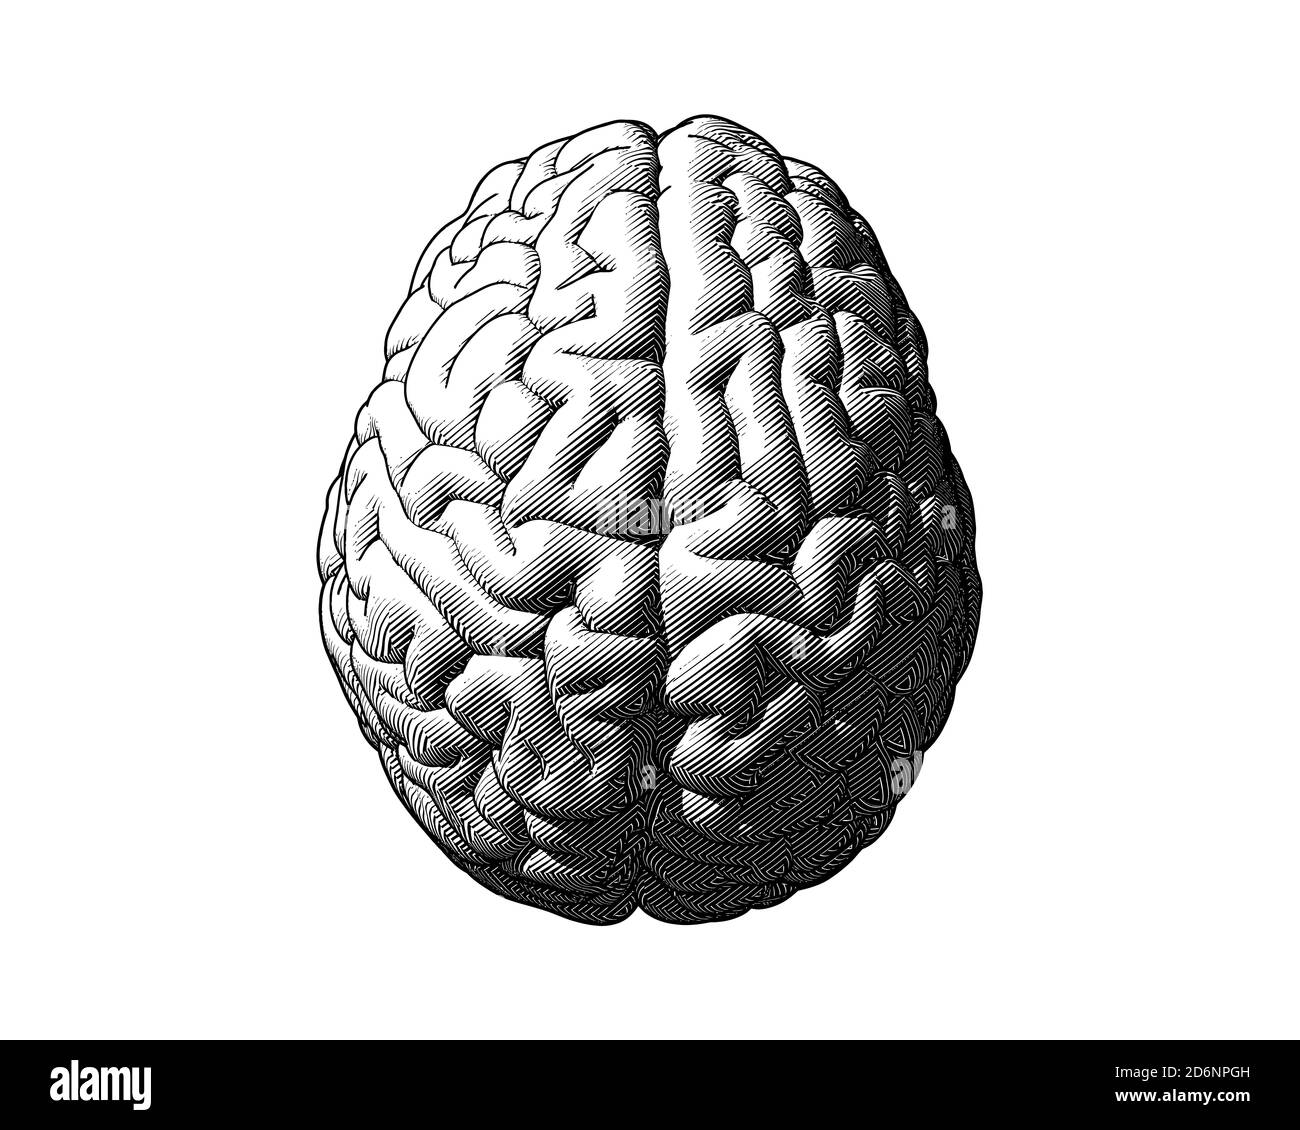 Monochrome engraving drawing brain in top view isolated on white background in striped line style Stock Photo